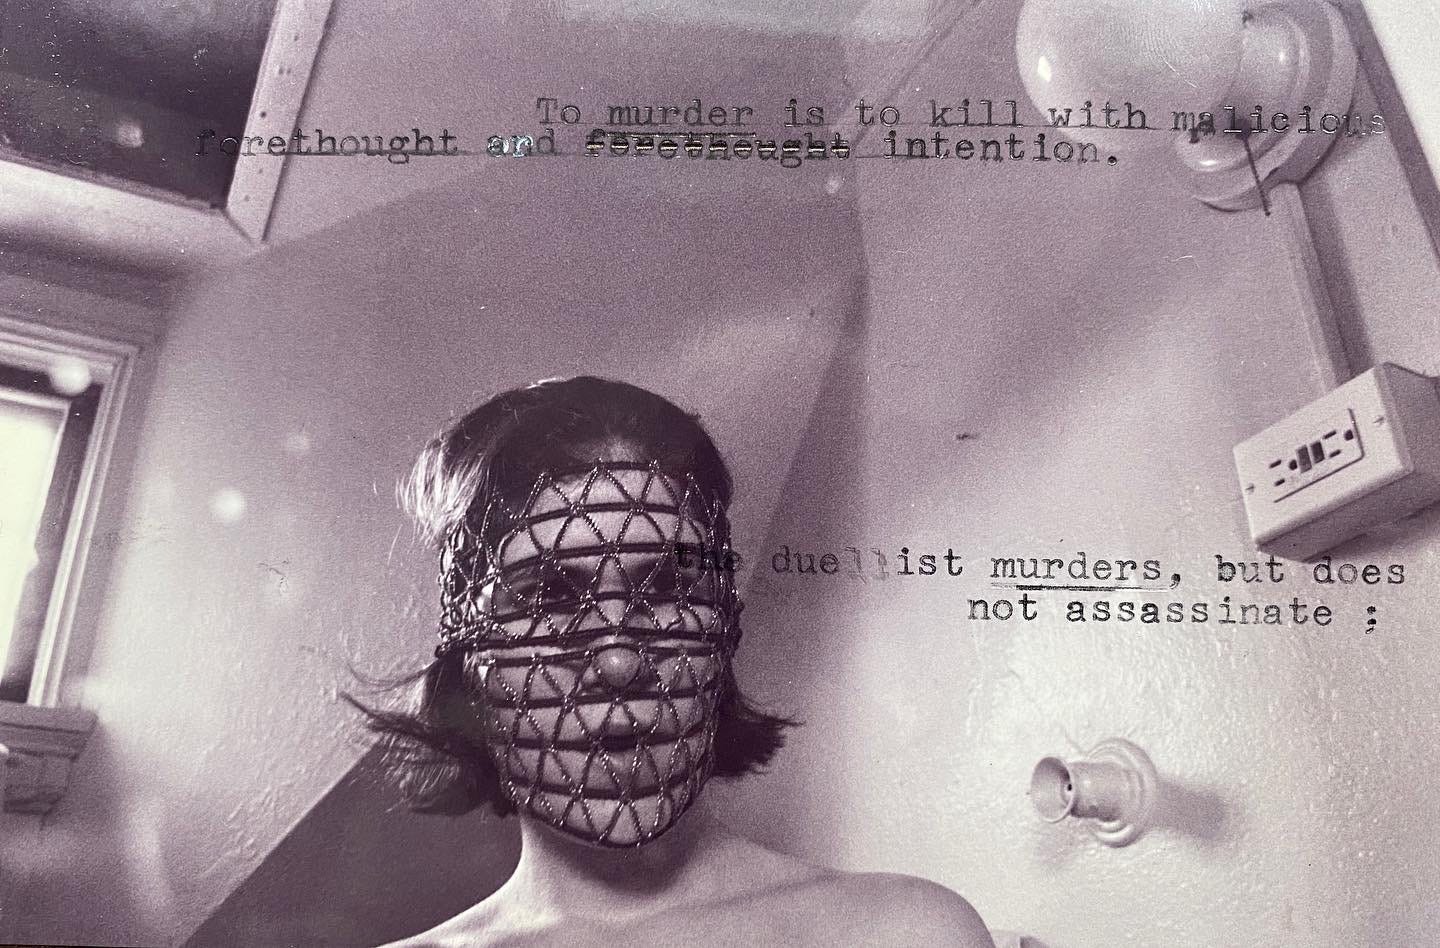 a black and white photo of a woman with her face in a tight cage. on the photo is typed "to murder is to kill with forethought and intention. The duellist murders, but does not assassinate